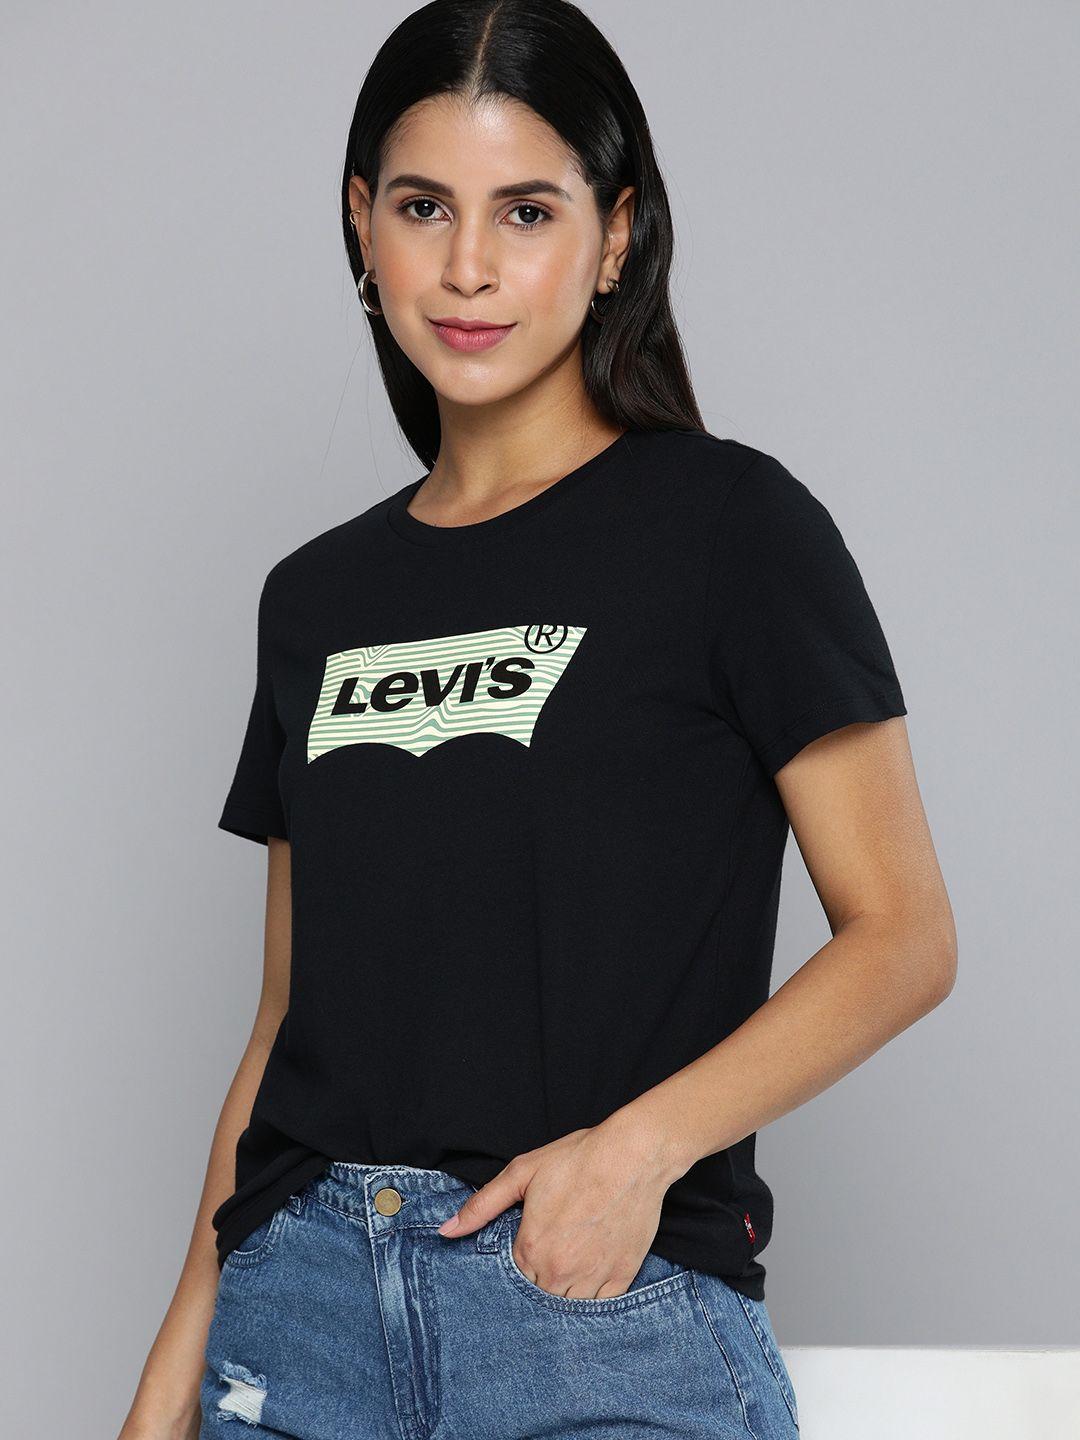 levis brand logo printed pure cotton casual t-shirt